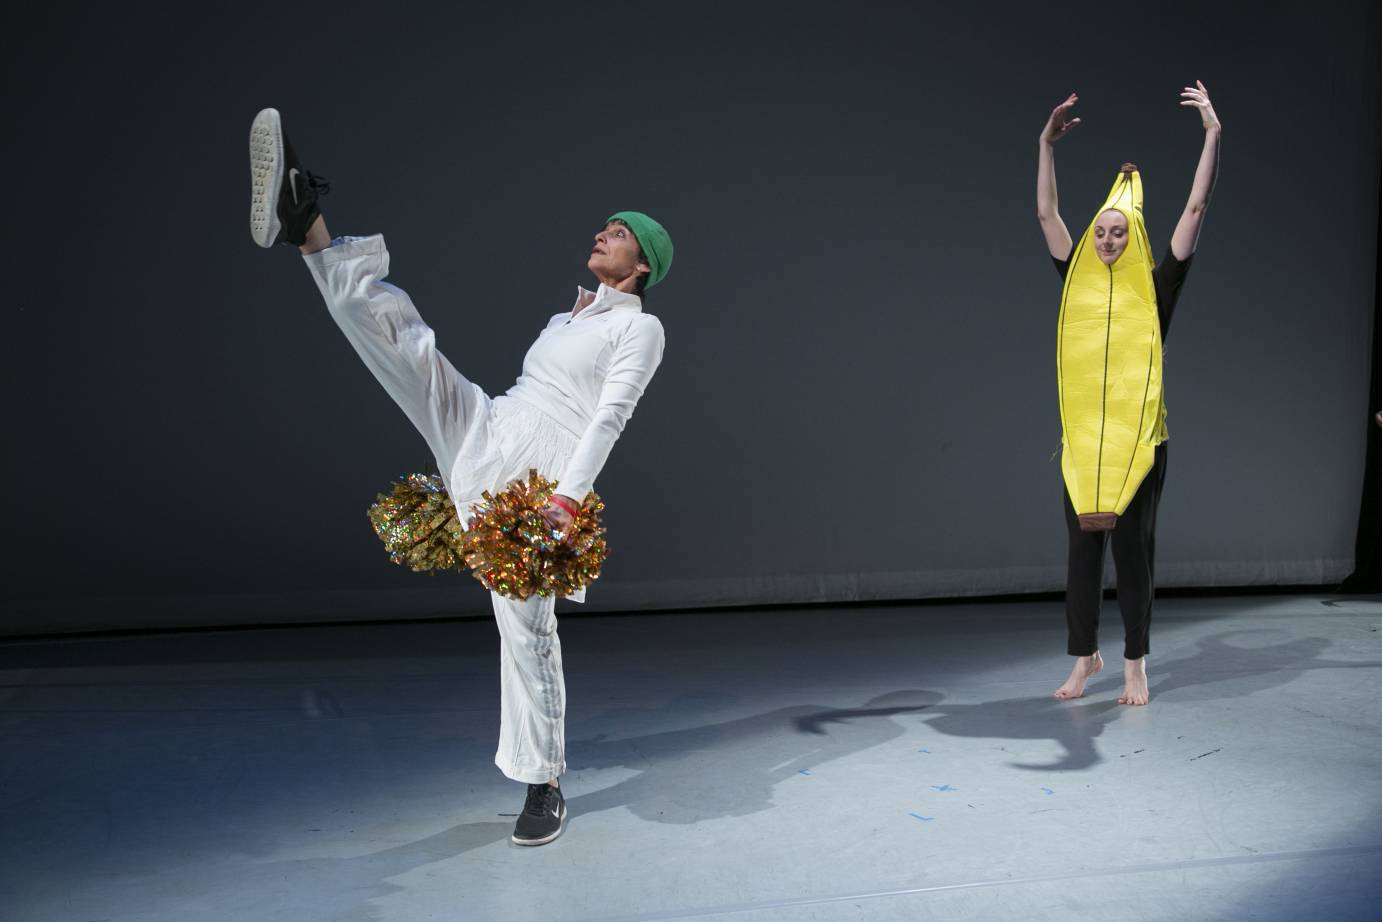 Women dressed as a cheerleader and a banana, respectively, dance on a diagonal